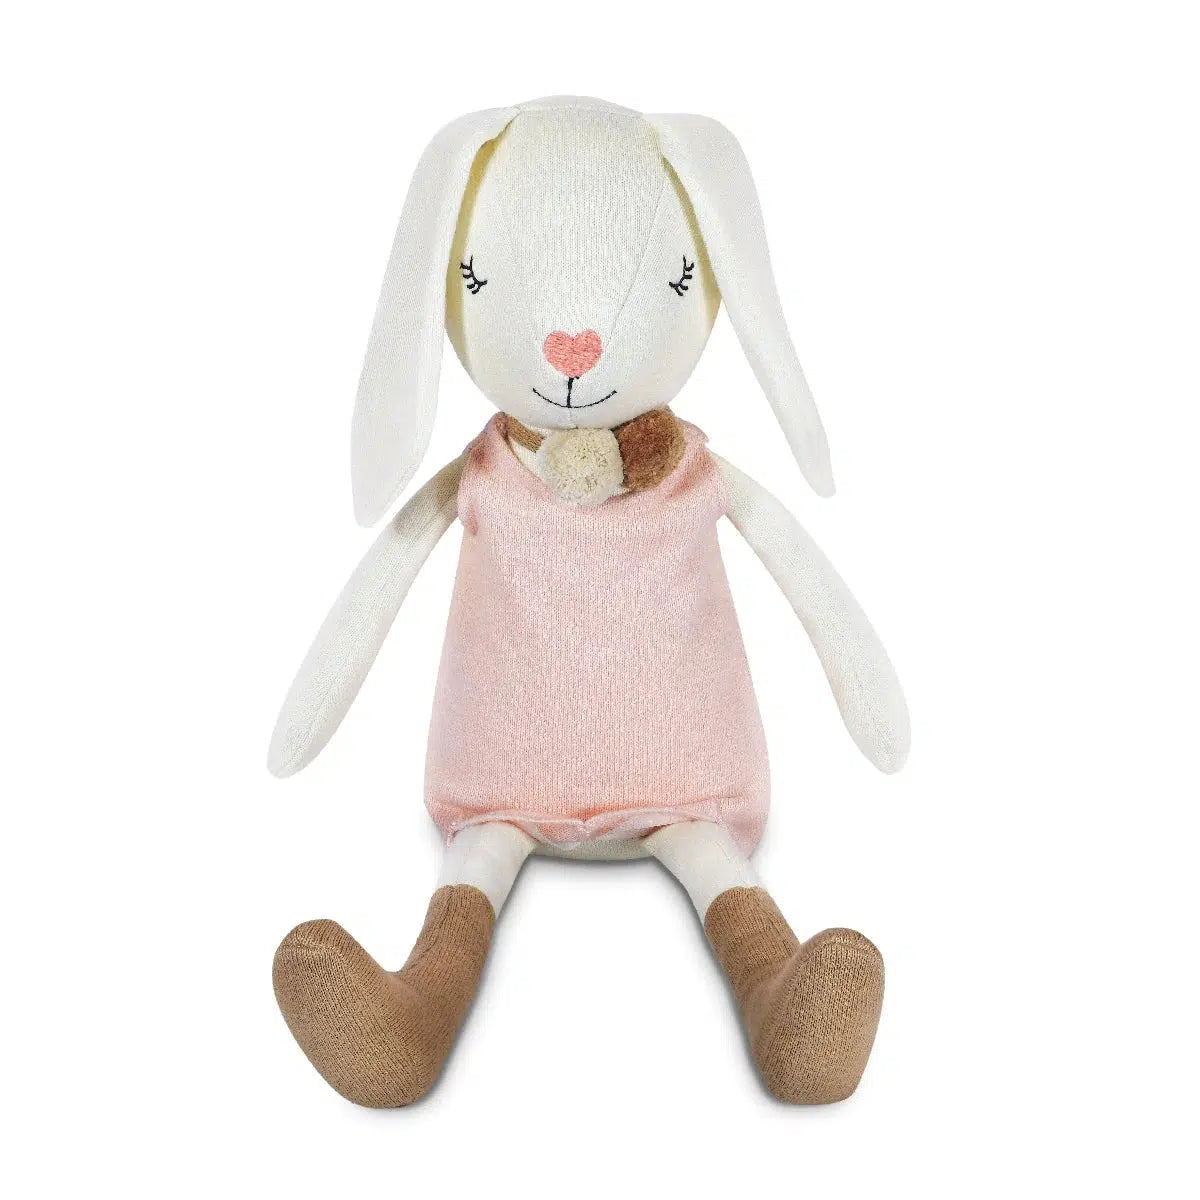 Front view of Knit Bunny Plush-Charlotte sitting.